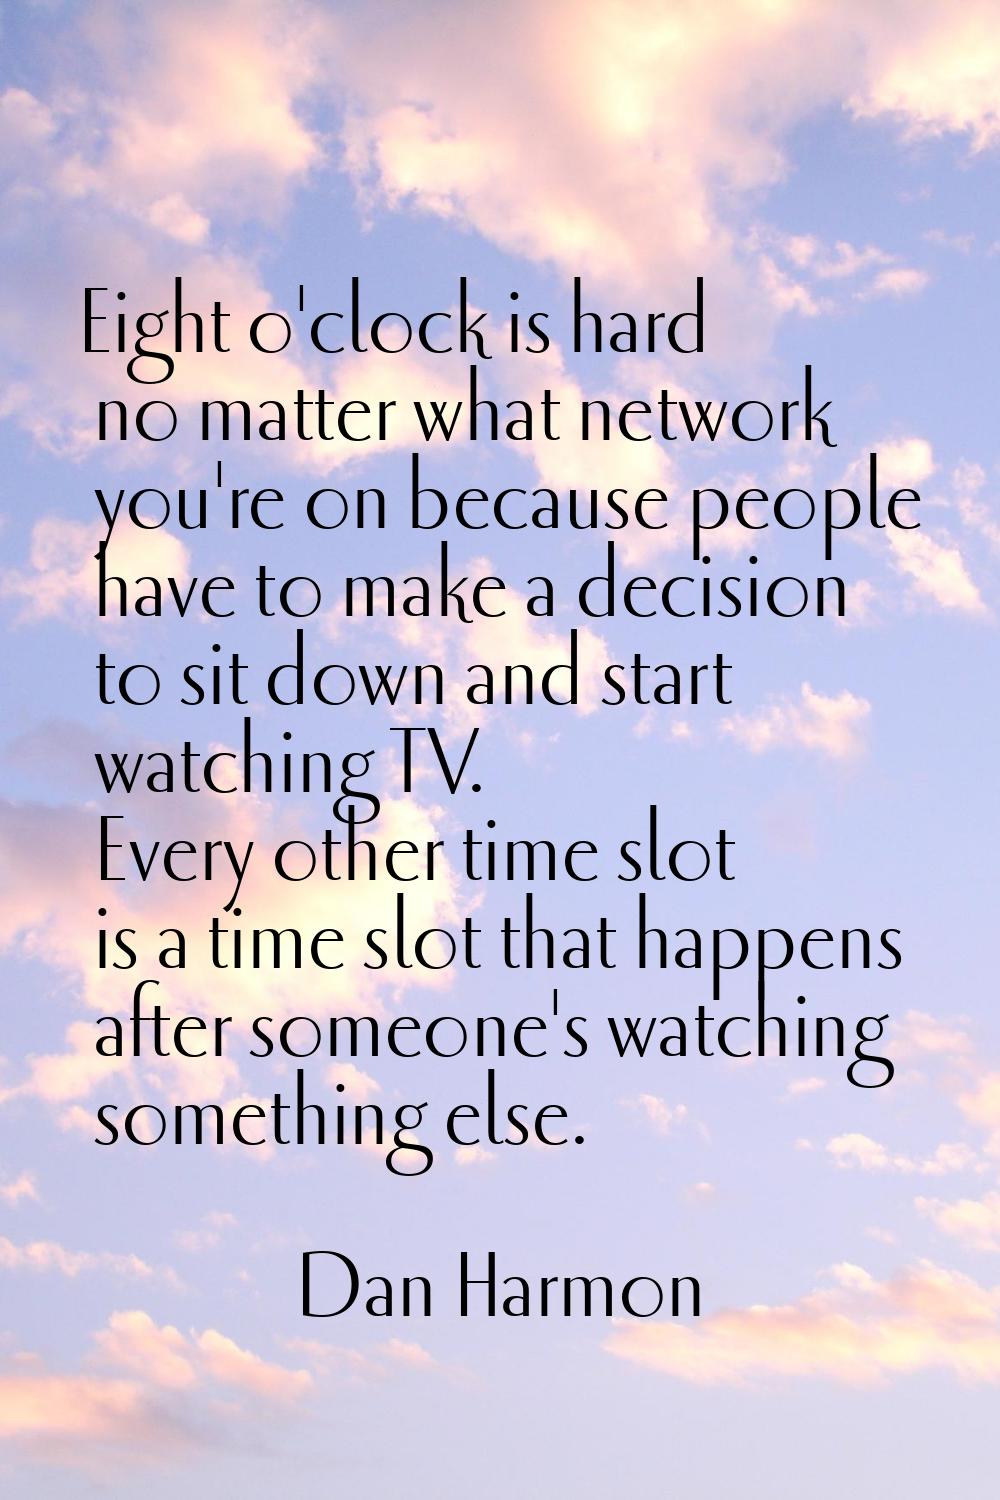 Eight o'clock is hard no matter what network you're on because people have to make a decision to si